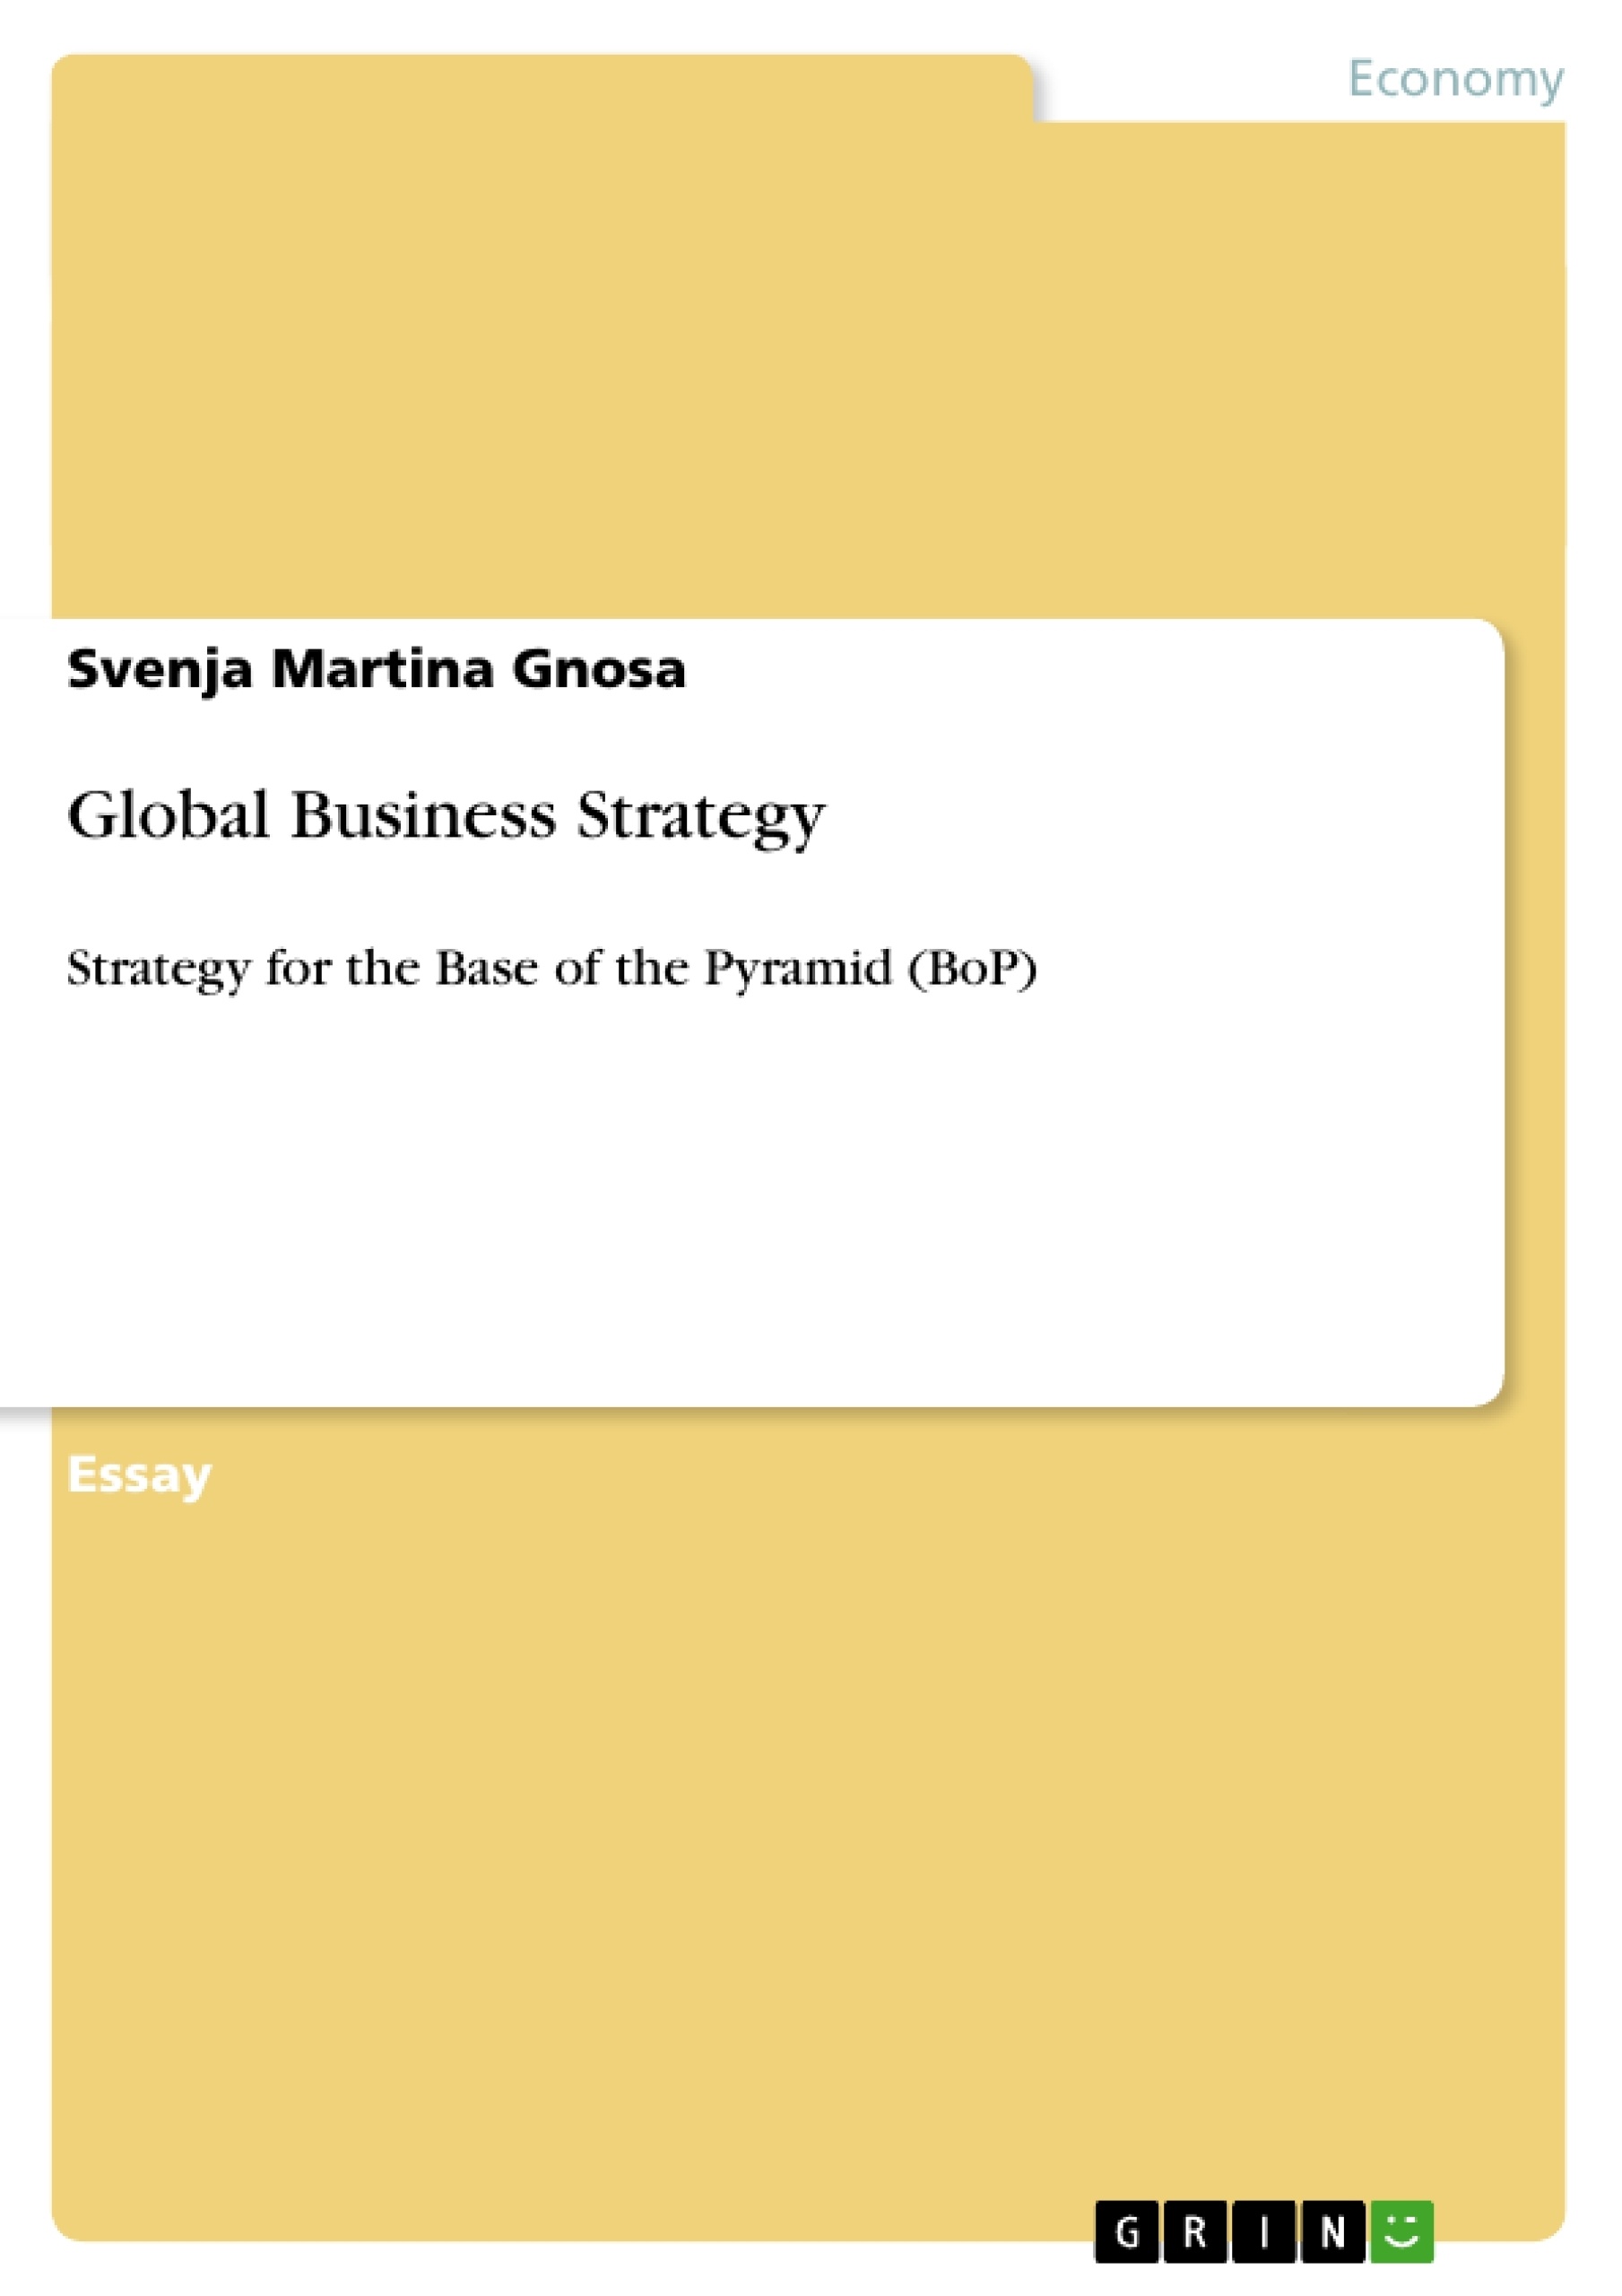 Title: Global Business Strategy 